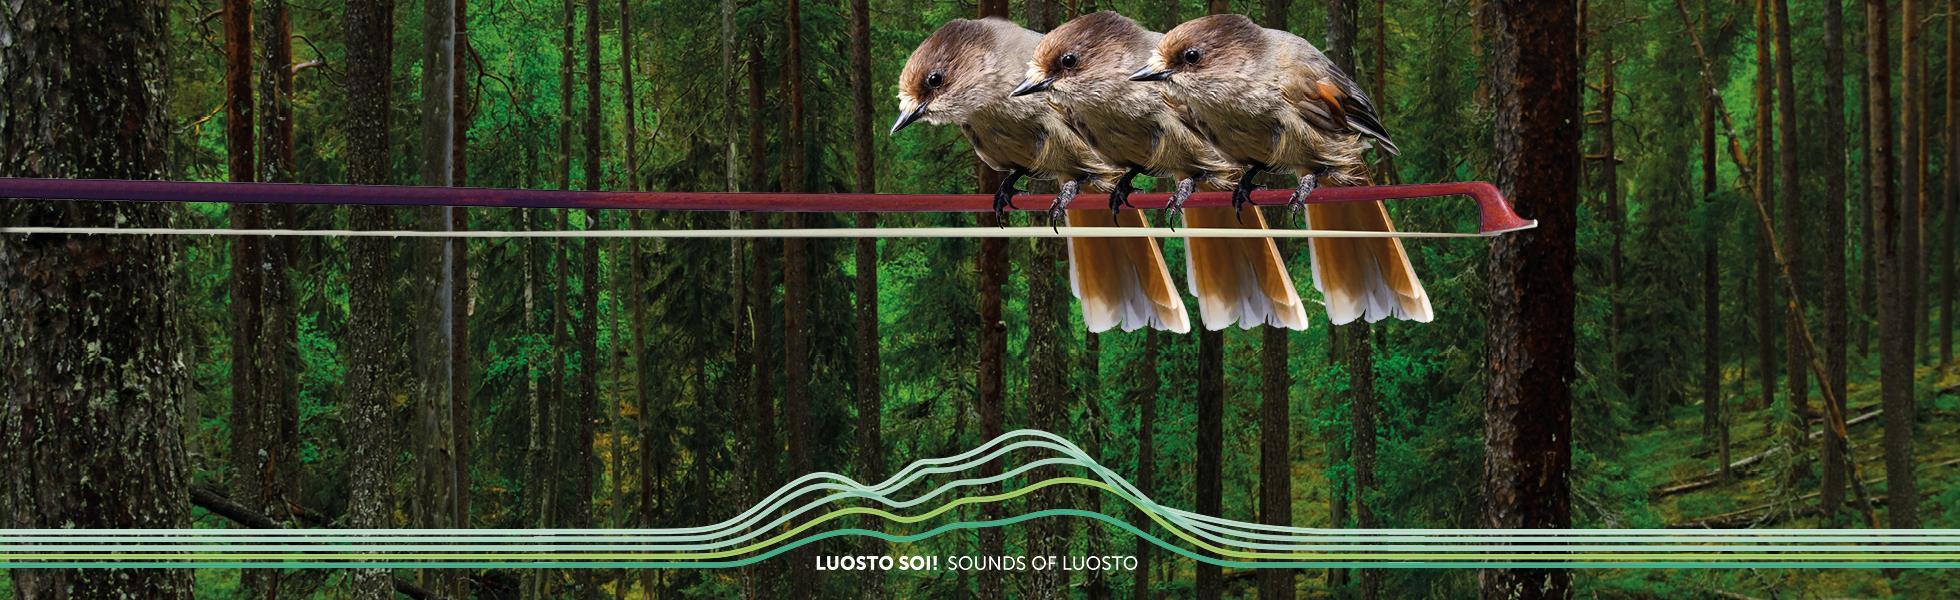 The Sounds of Luosto 2020 will be moved to the summer of 2021